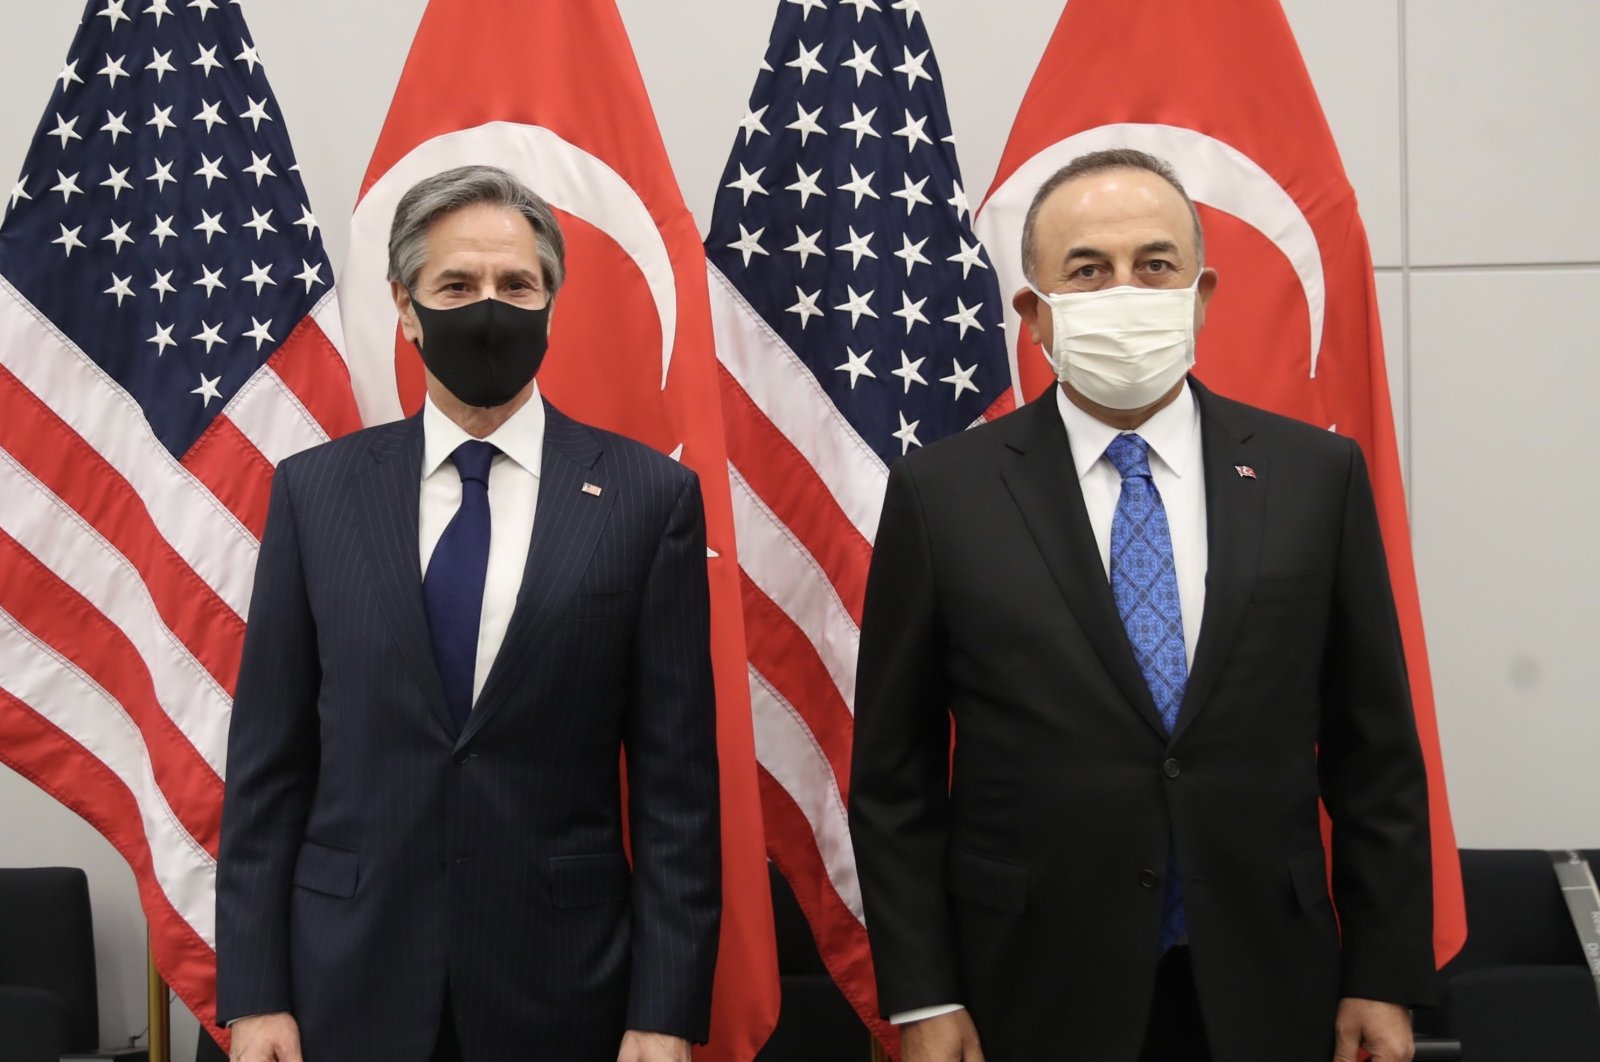 Foreign Minister Mevlüt Çavuşoğlu (R) and his U.S. counterpart Anthony Blinken pose for a photo during a NATO summit in Brussels, Belgium, Mar. 21, 2021. (AA File Photo)